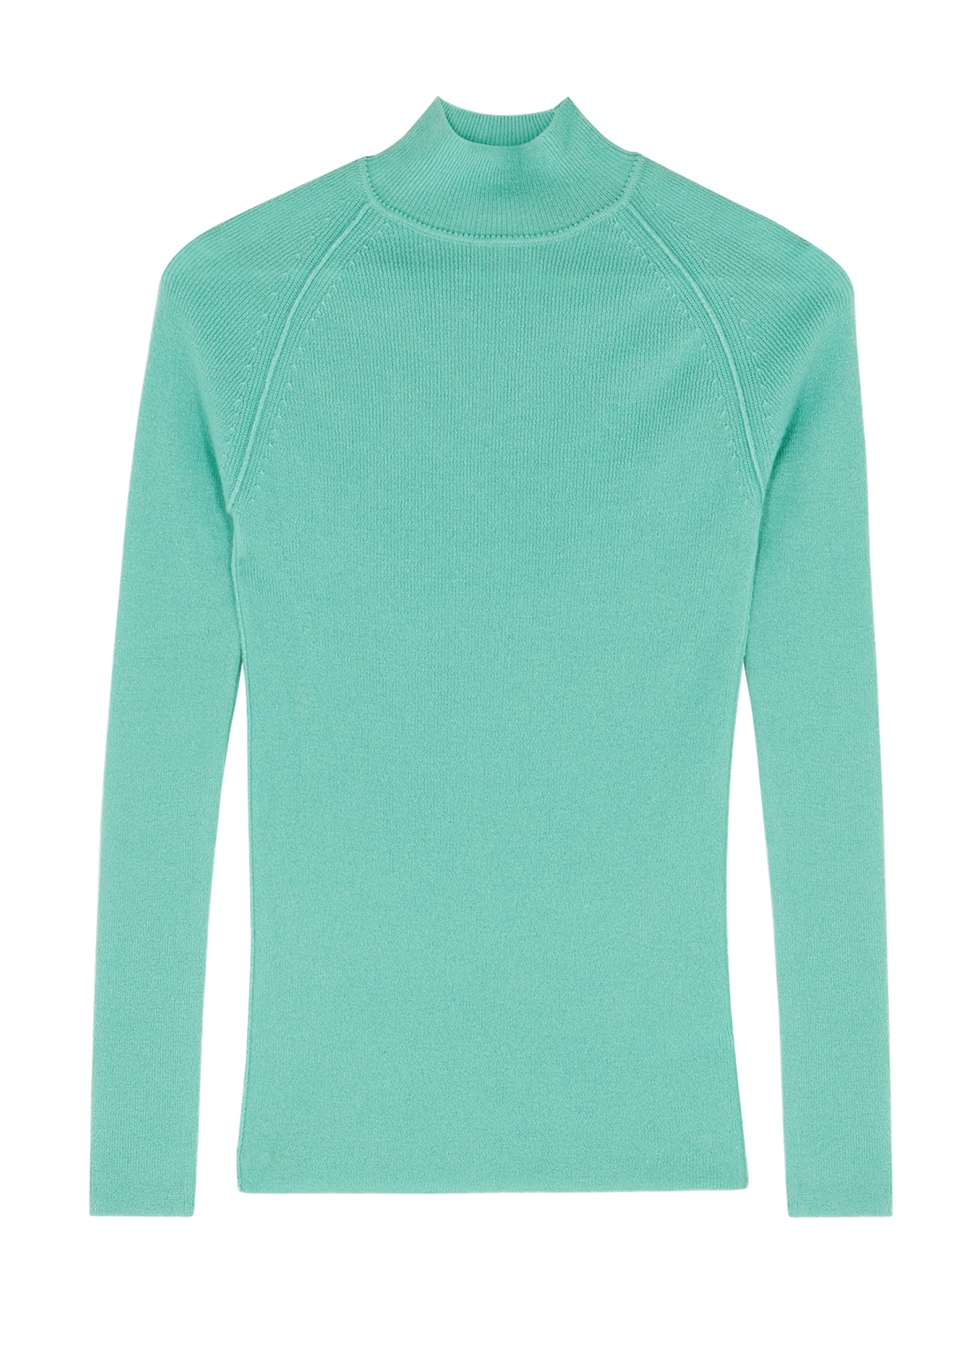 Teal wool and cashmere-blend jumper